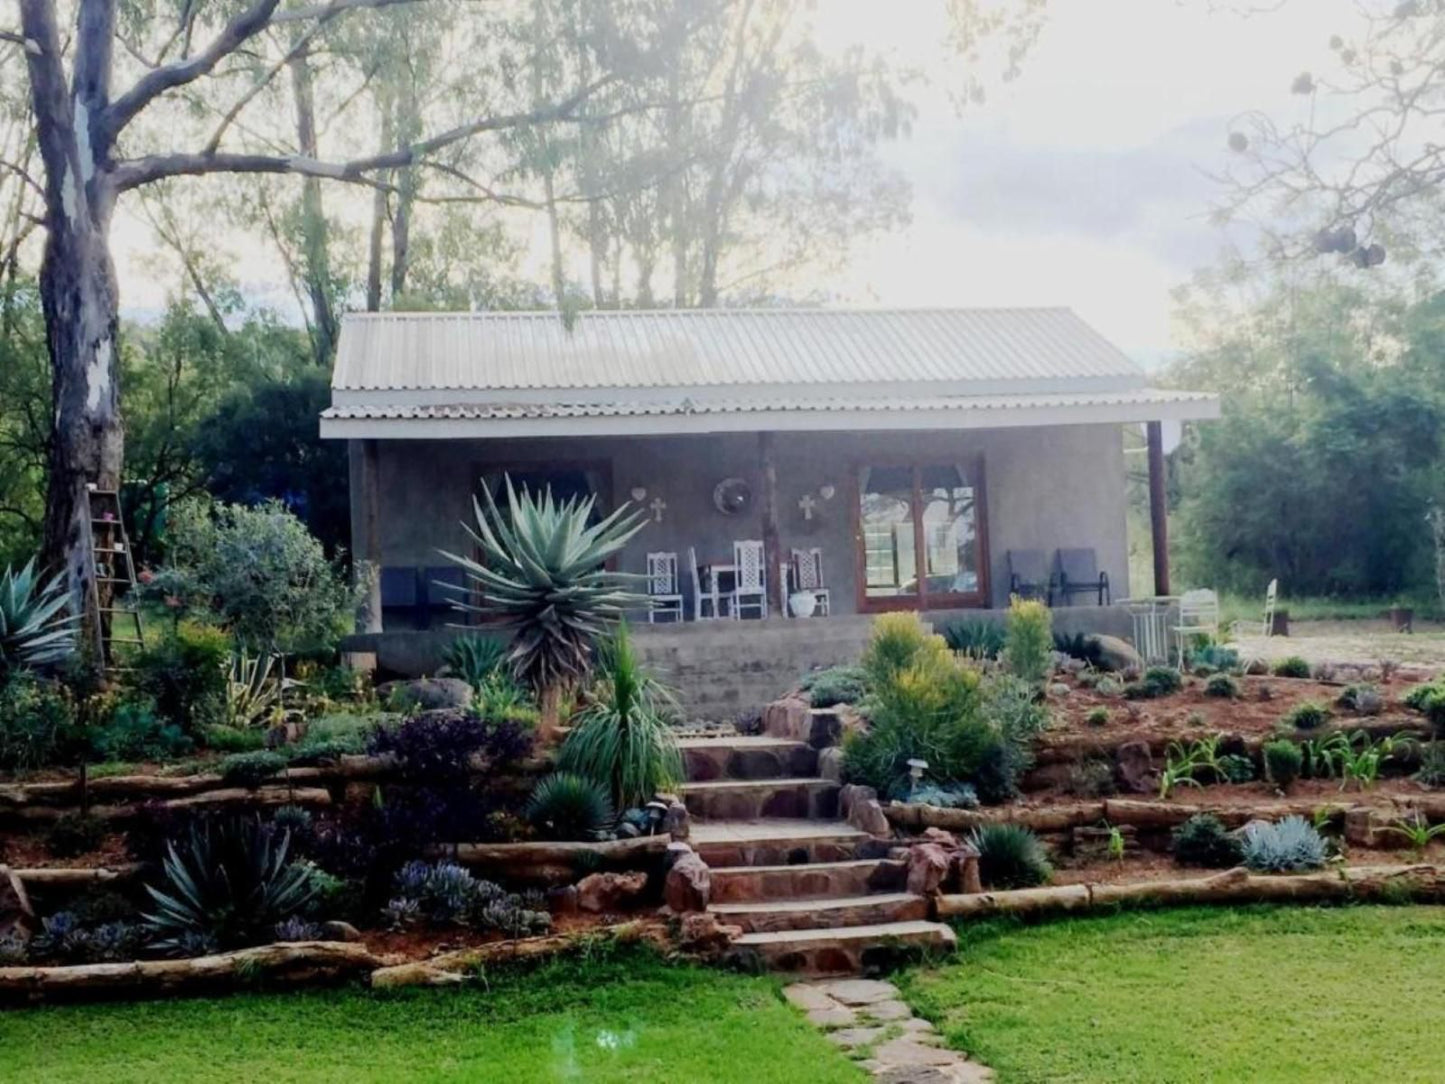 Hadida Guesthouse Swartruggens North West Province South Africa Garden, Nature, Plant